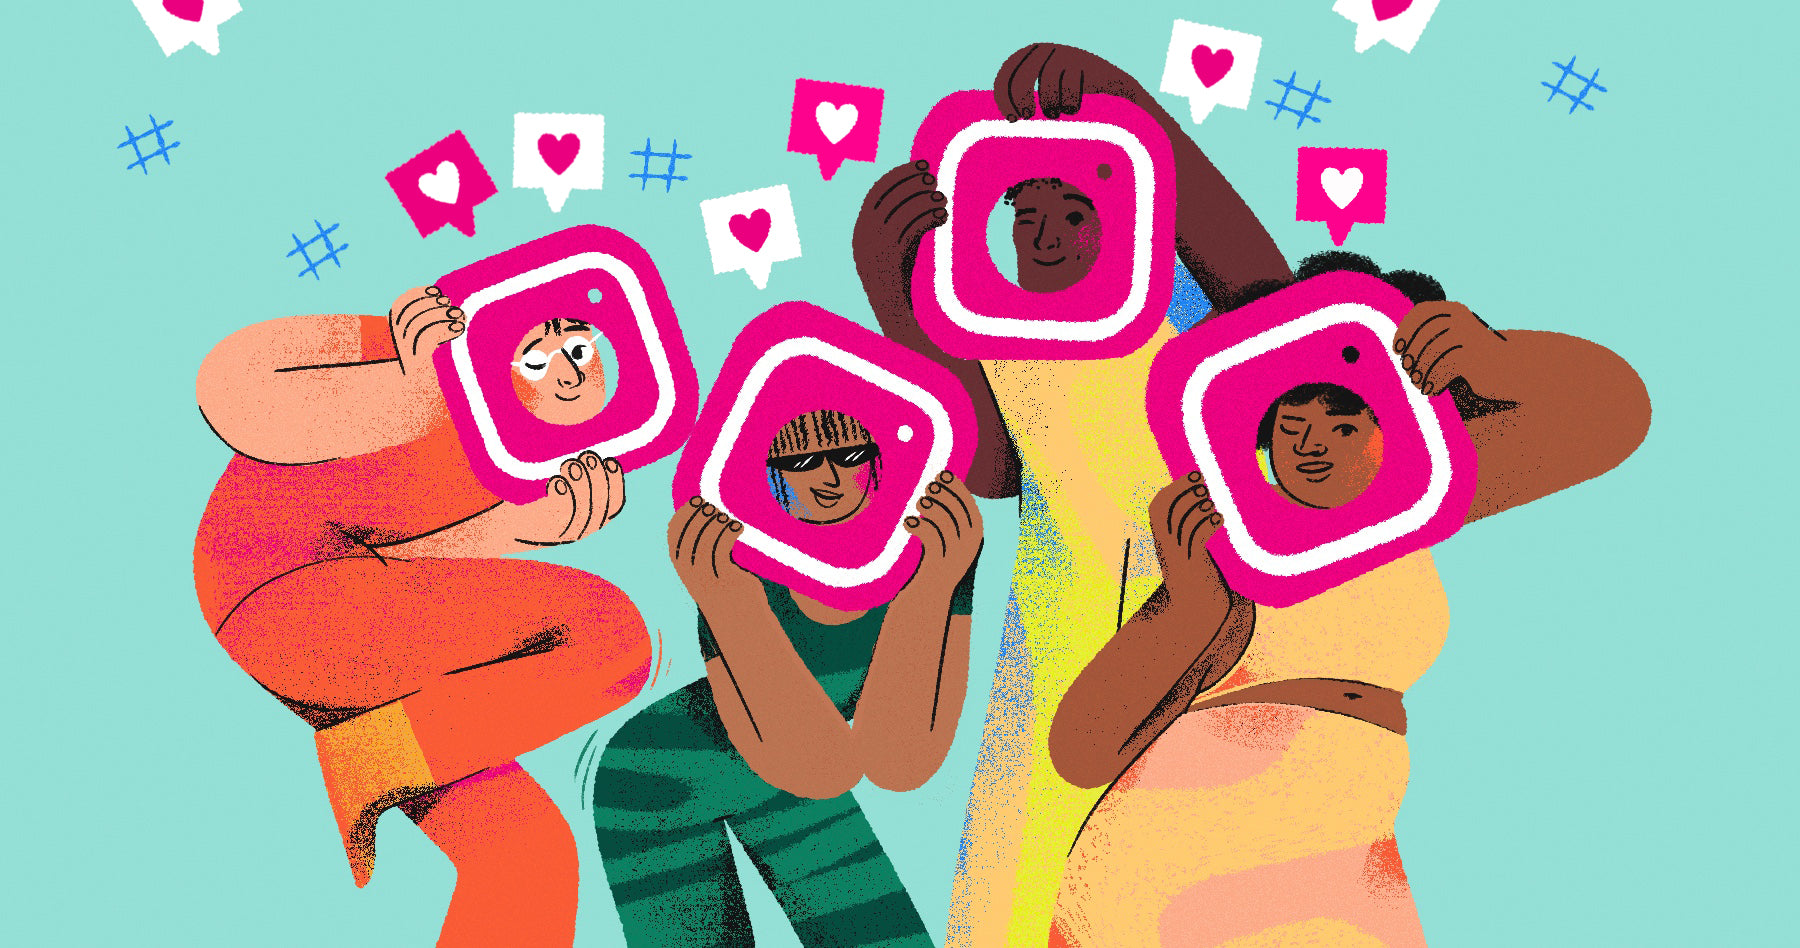 Illustration of four characters looking through the Instagram logo with hashtags and hearts surrounding them. This is a metaphor for gaining new followers.